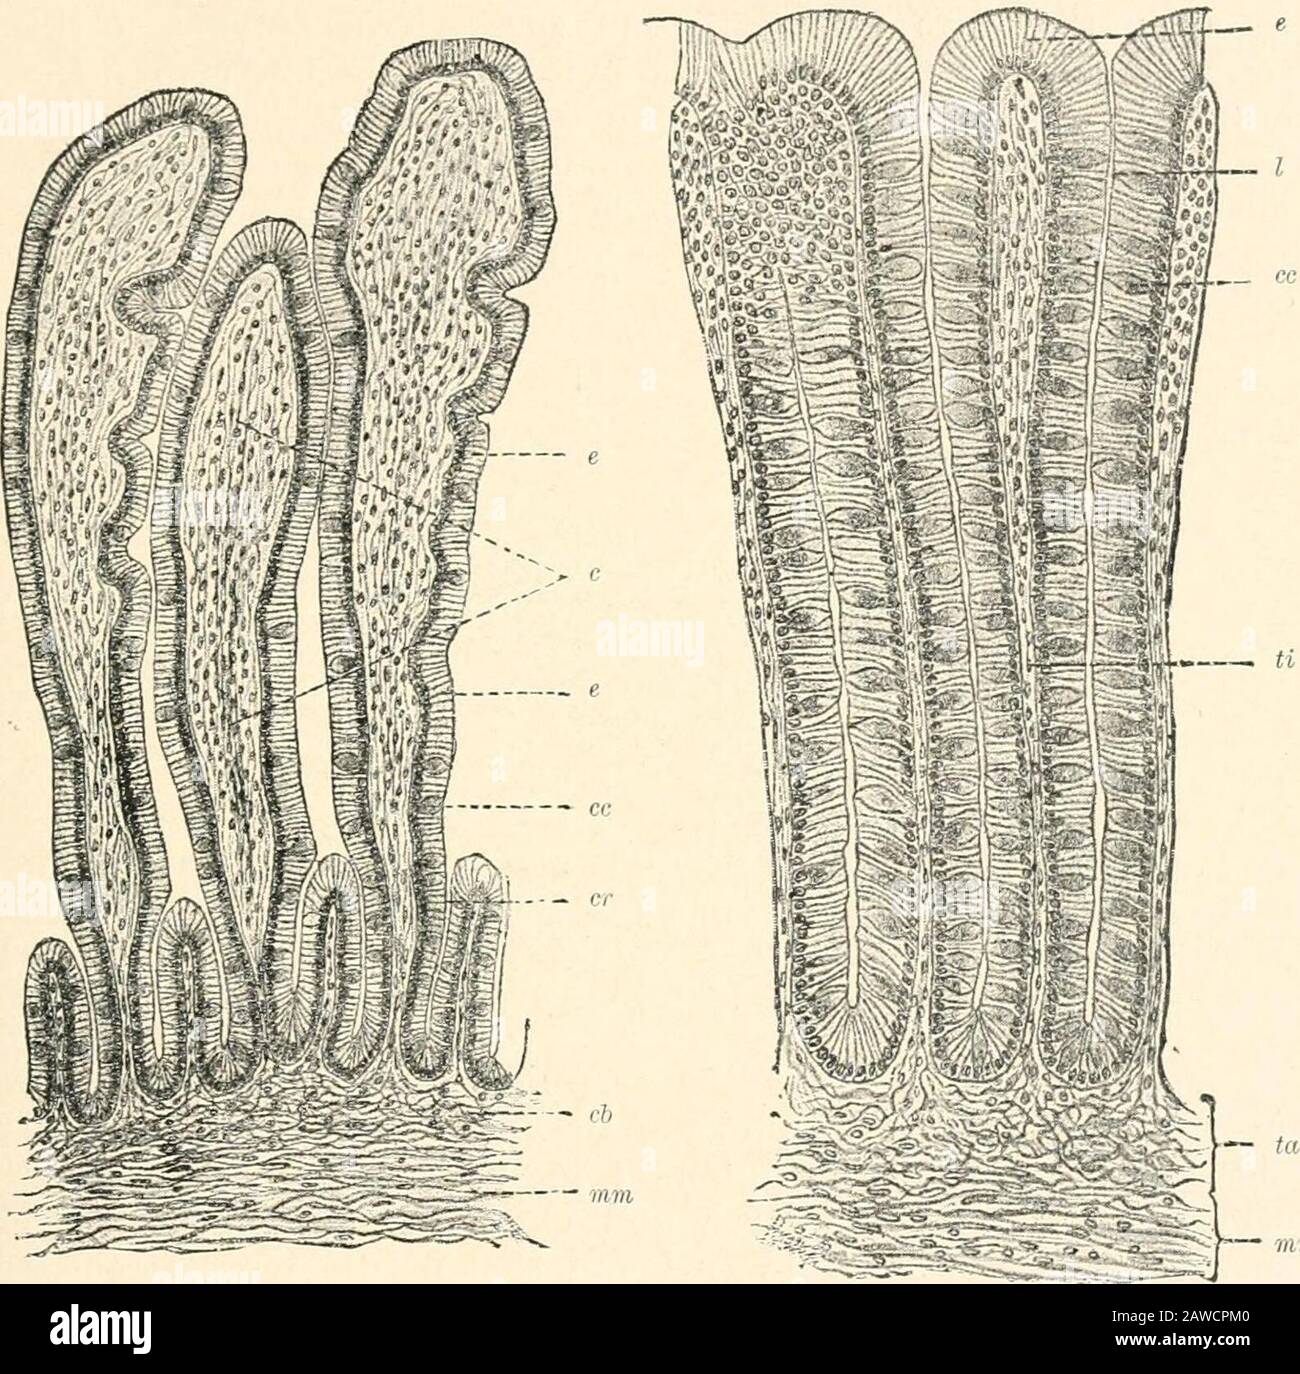 Human physiology . folds in the form ofcrescentic projections of the mucous membrane, placed transverselyto the axis of the bowel, at a short distance from one another(valvulae conniventes or valves of Kerkring). The whole surface,including the valvular folds, is closely beset with villi, of varyinglength, cylindrical in the jejunum, filiform in the ileum (Fig. 41),which enormously increase the intestinal surface. The mucouscoat of the large intestine is smooth, and destitute of villi(Fig. 42). Between the villi of the small intestine, in every part, arethe simple tubular glands, Lieberkiihns Stock Photo